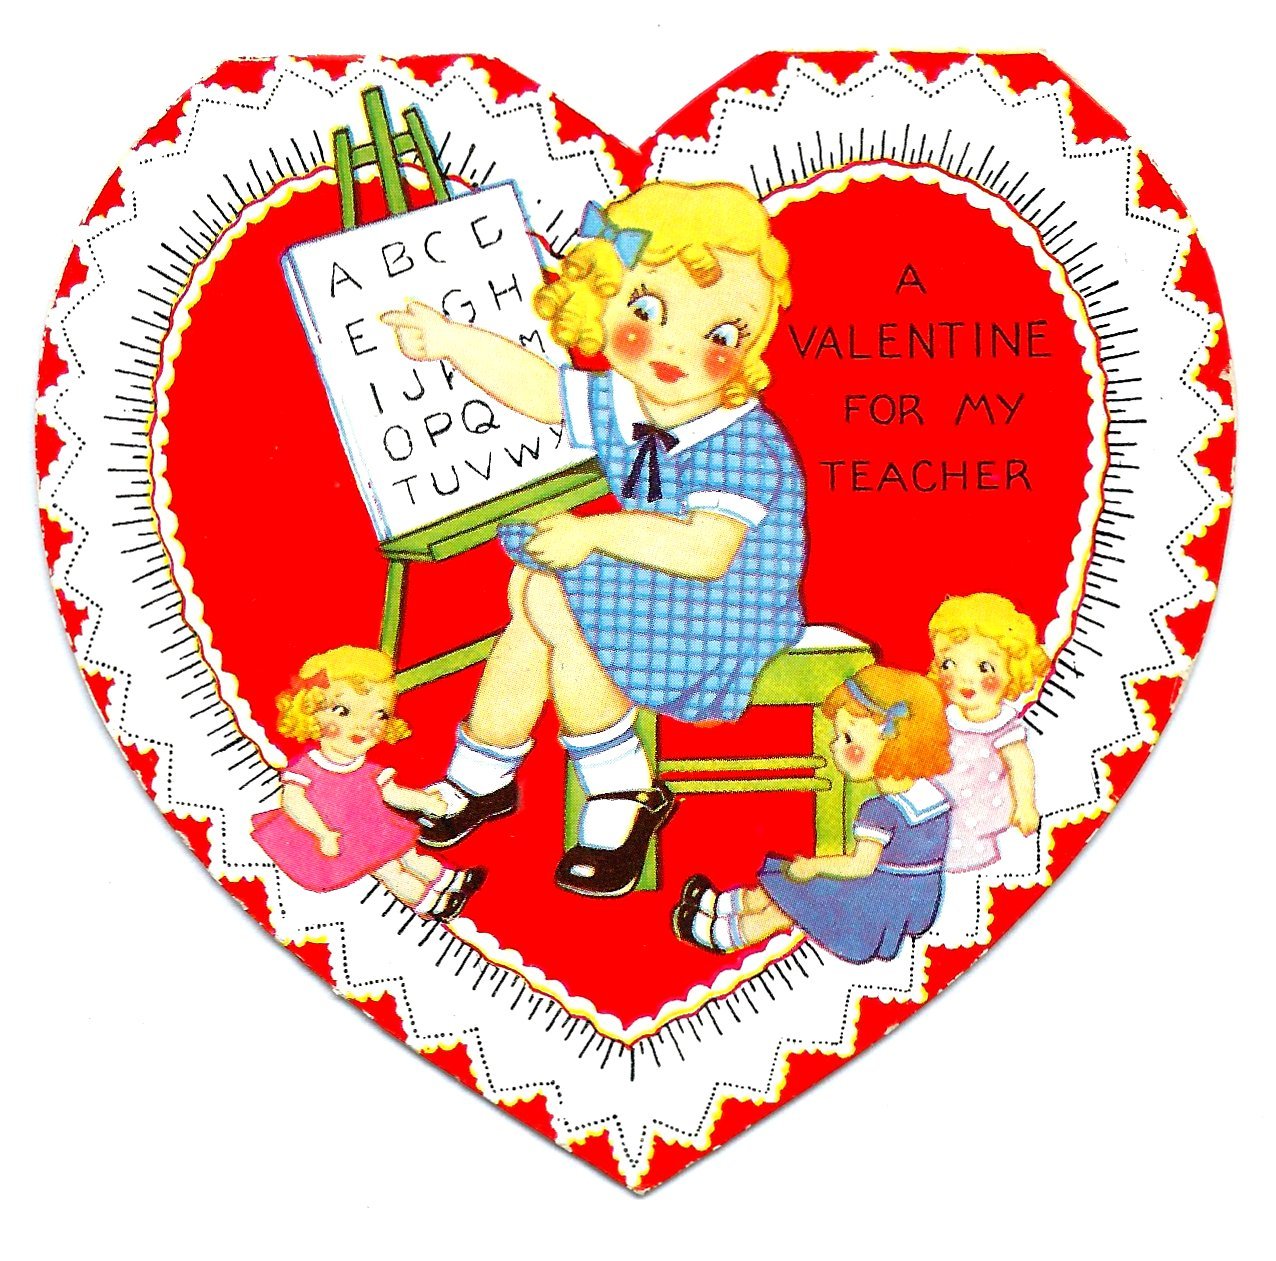 A colorful, heart-shaped vintage valentine of a cartoon girl teaching the dolls at her feet to read by pointing at the letter “A” shown on an alphabet poster. Text reads: “A valentine for my teacher.”